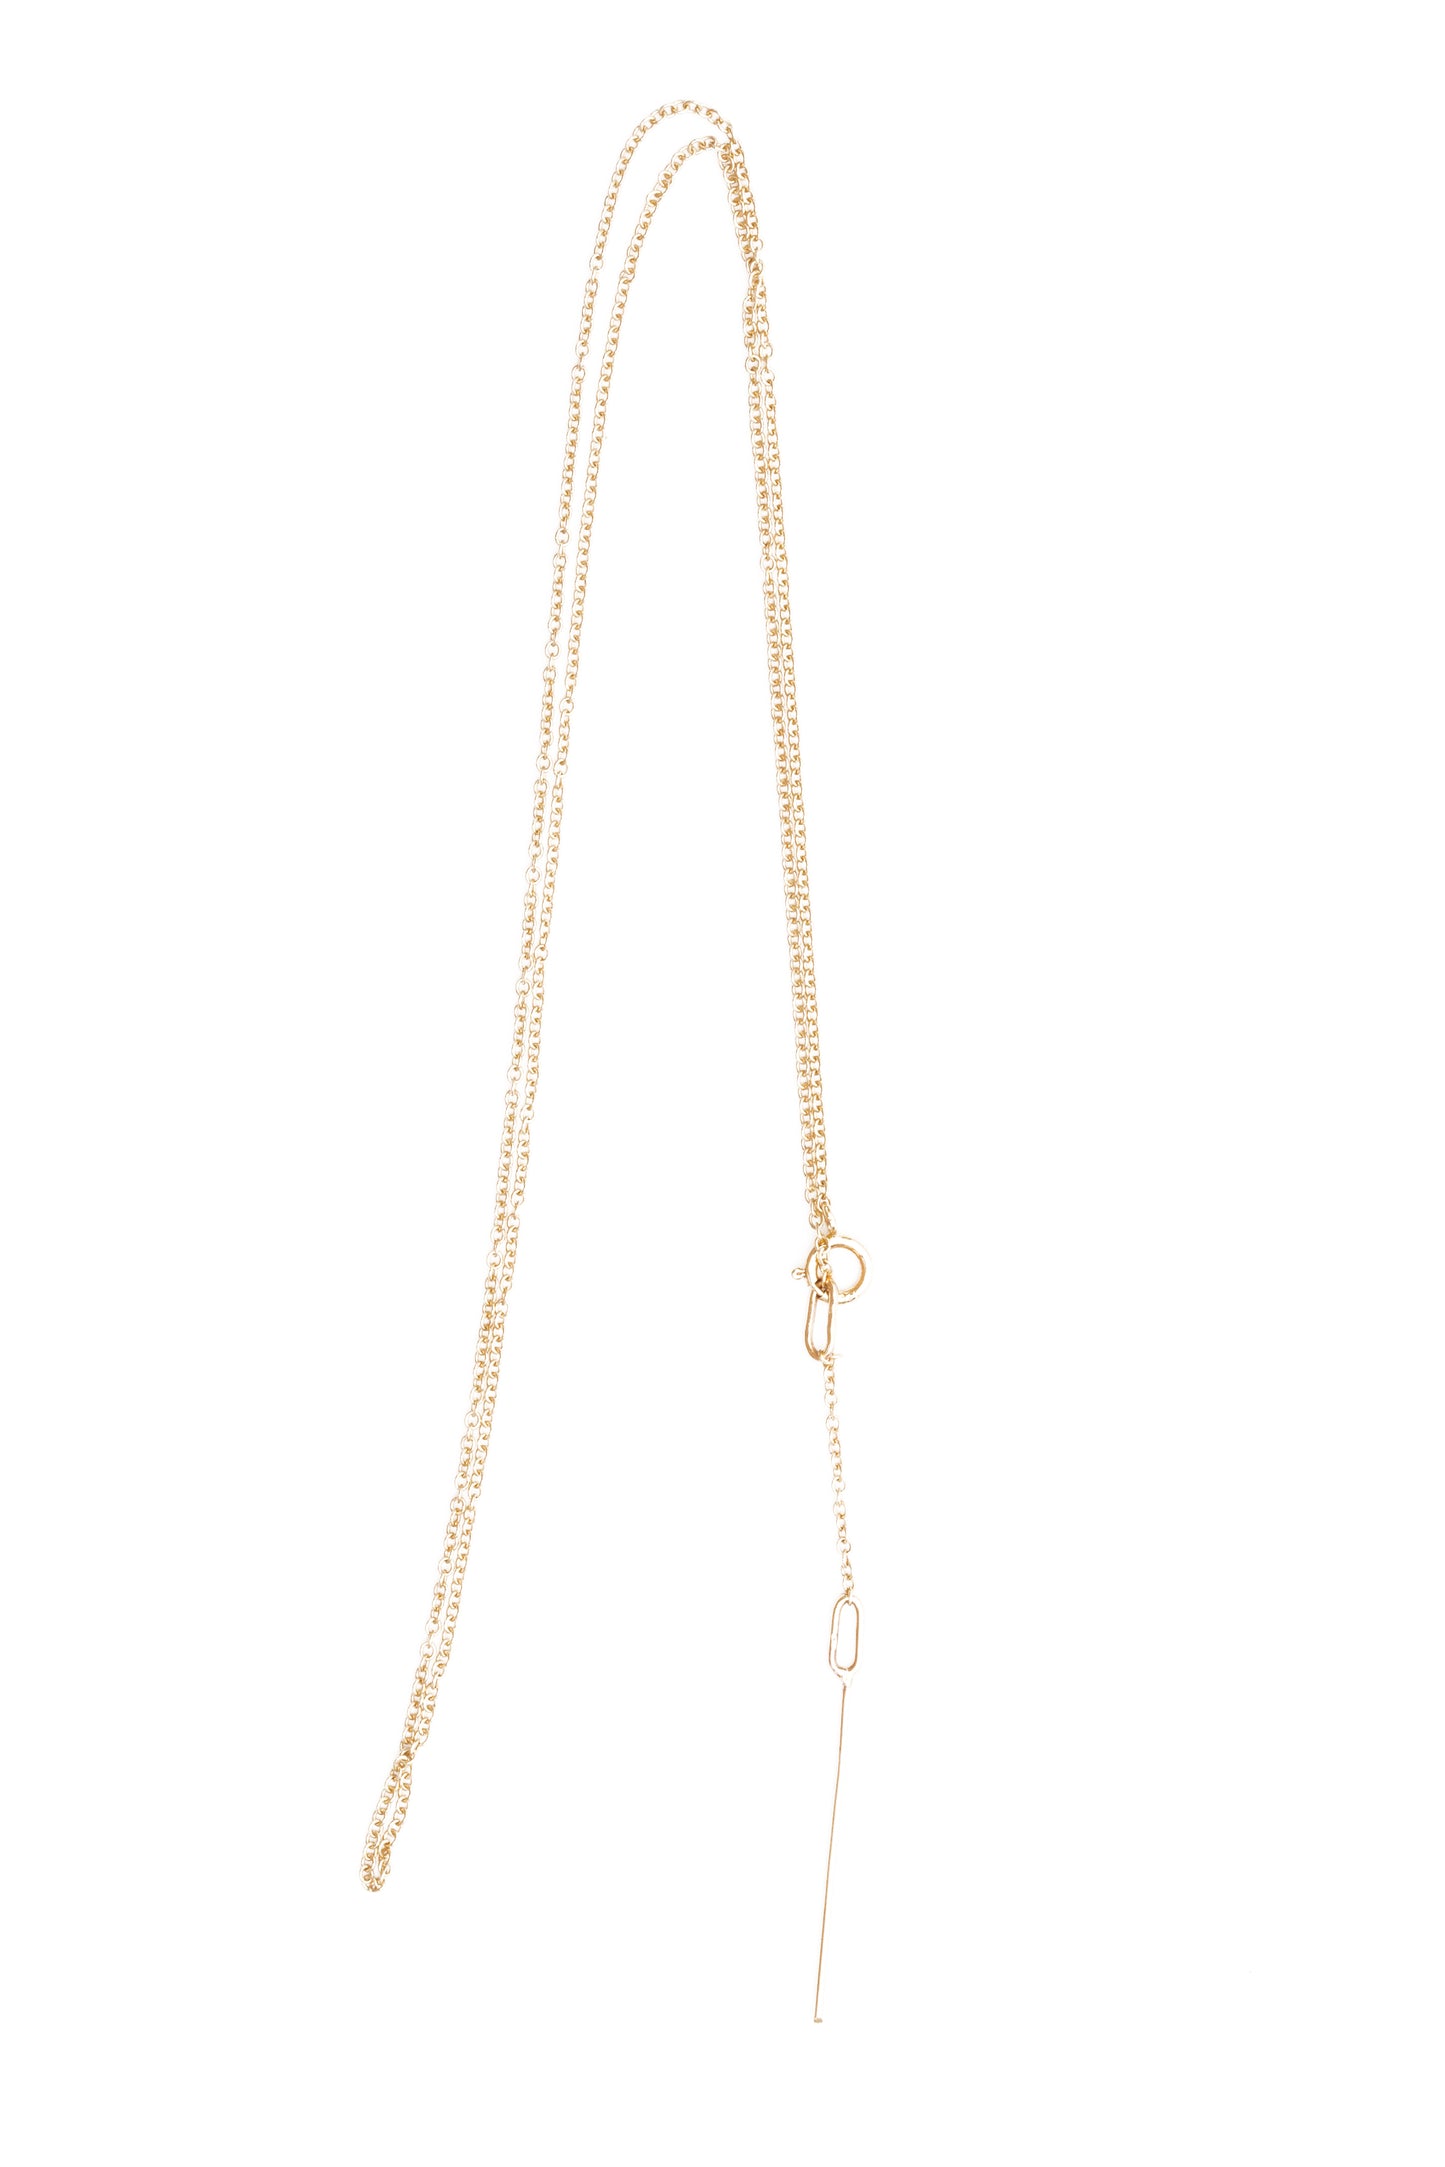 "Need(le) Me" Gold Necklace